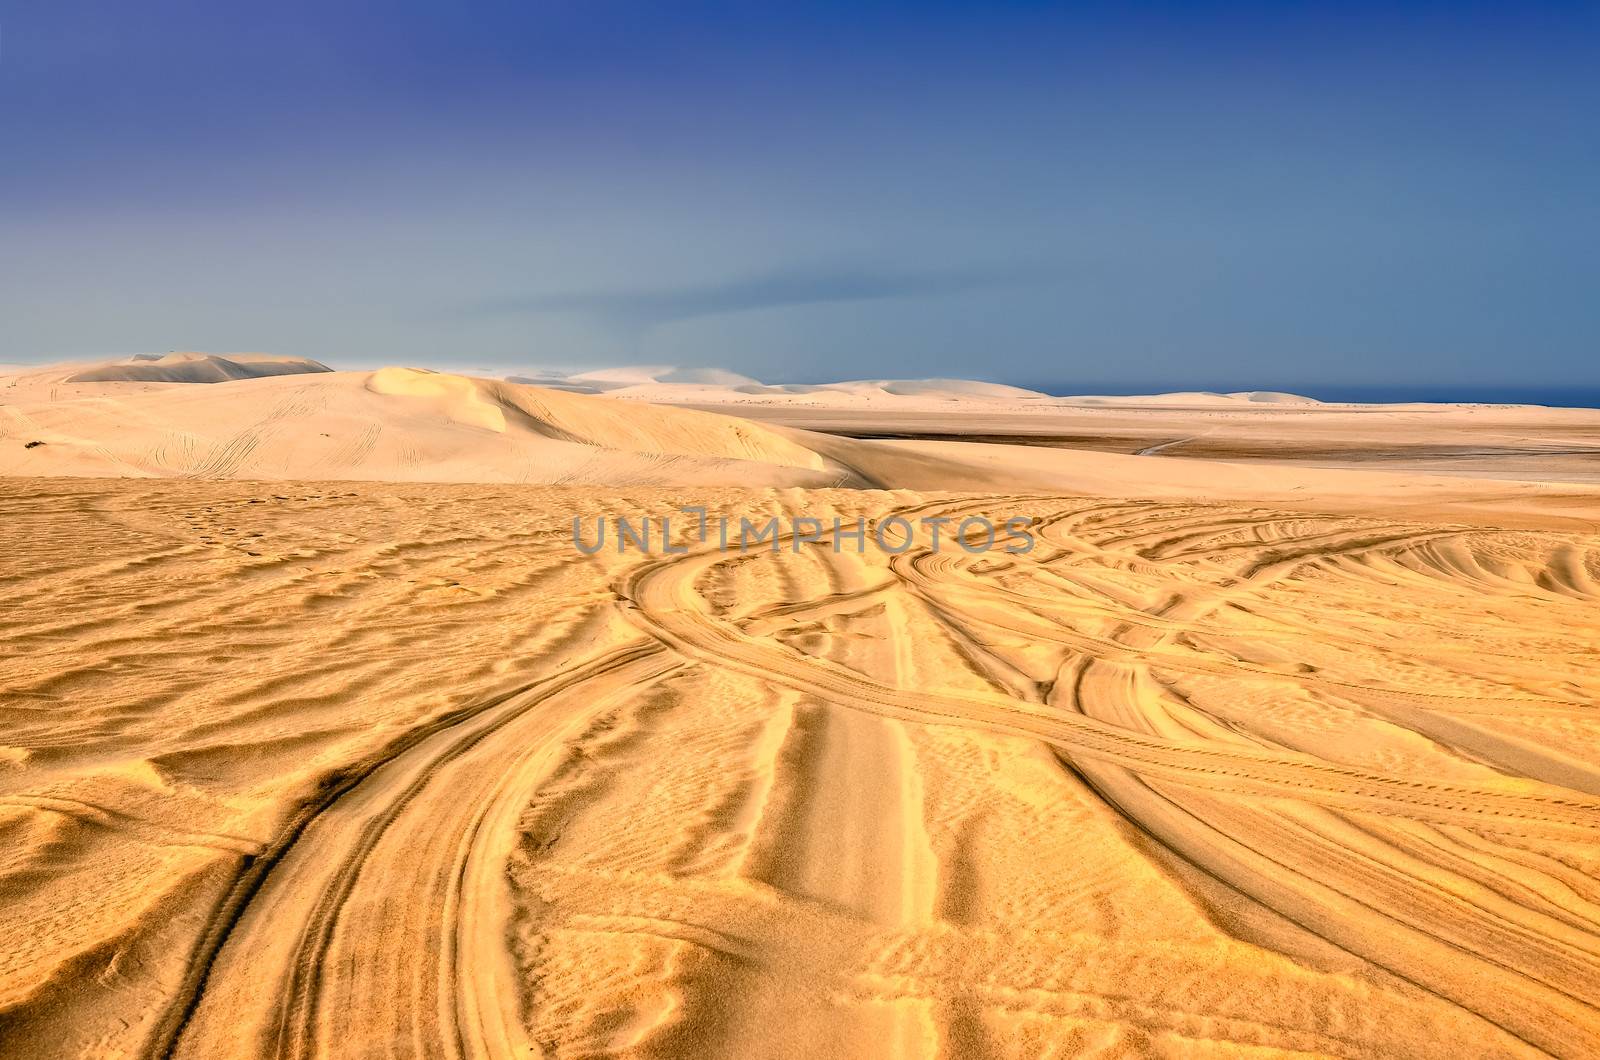 Tyre tracks in sand desert by martinm303